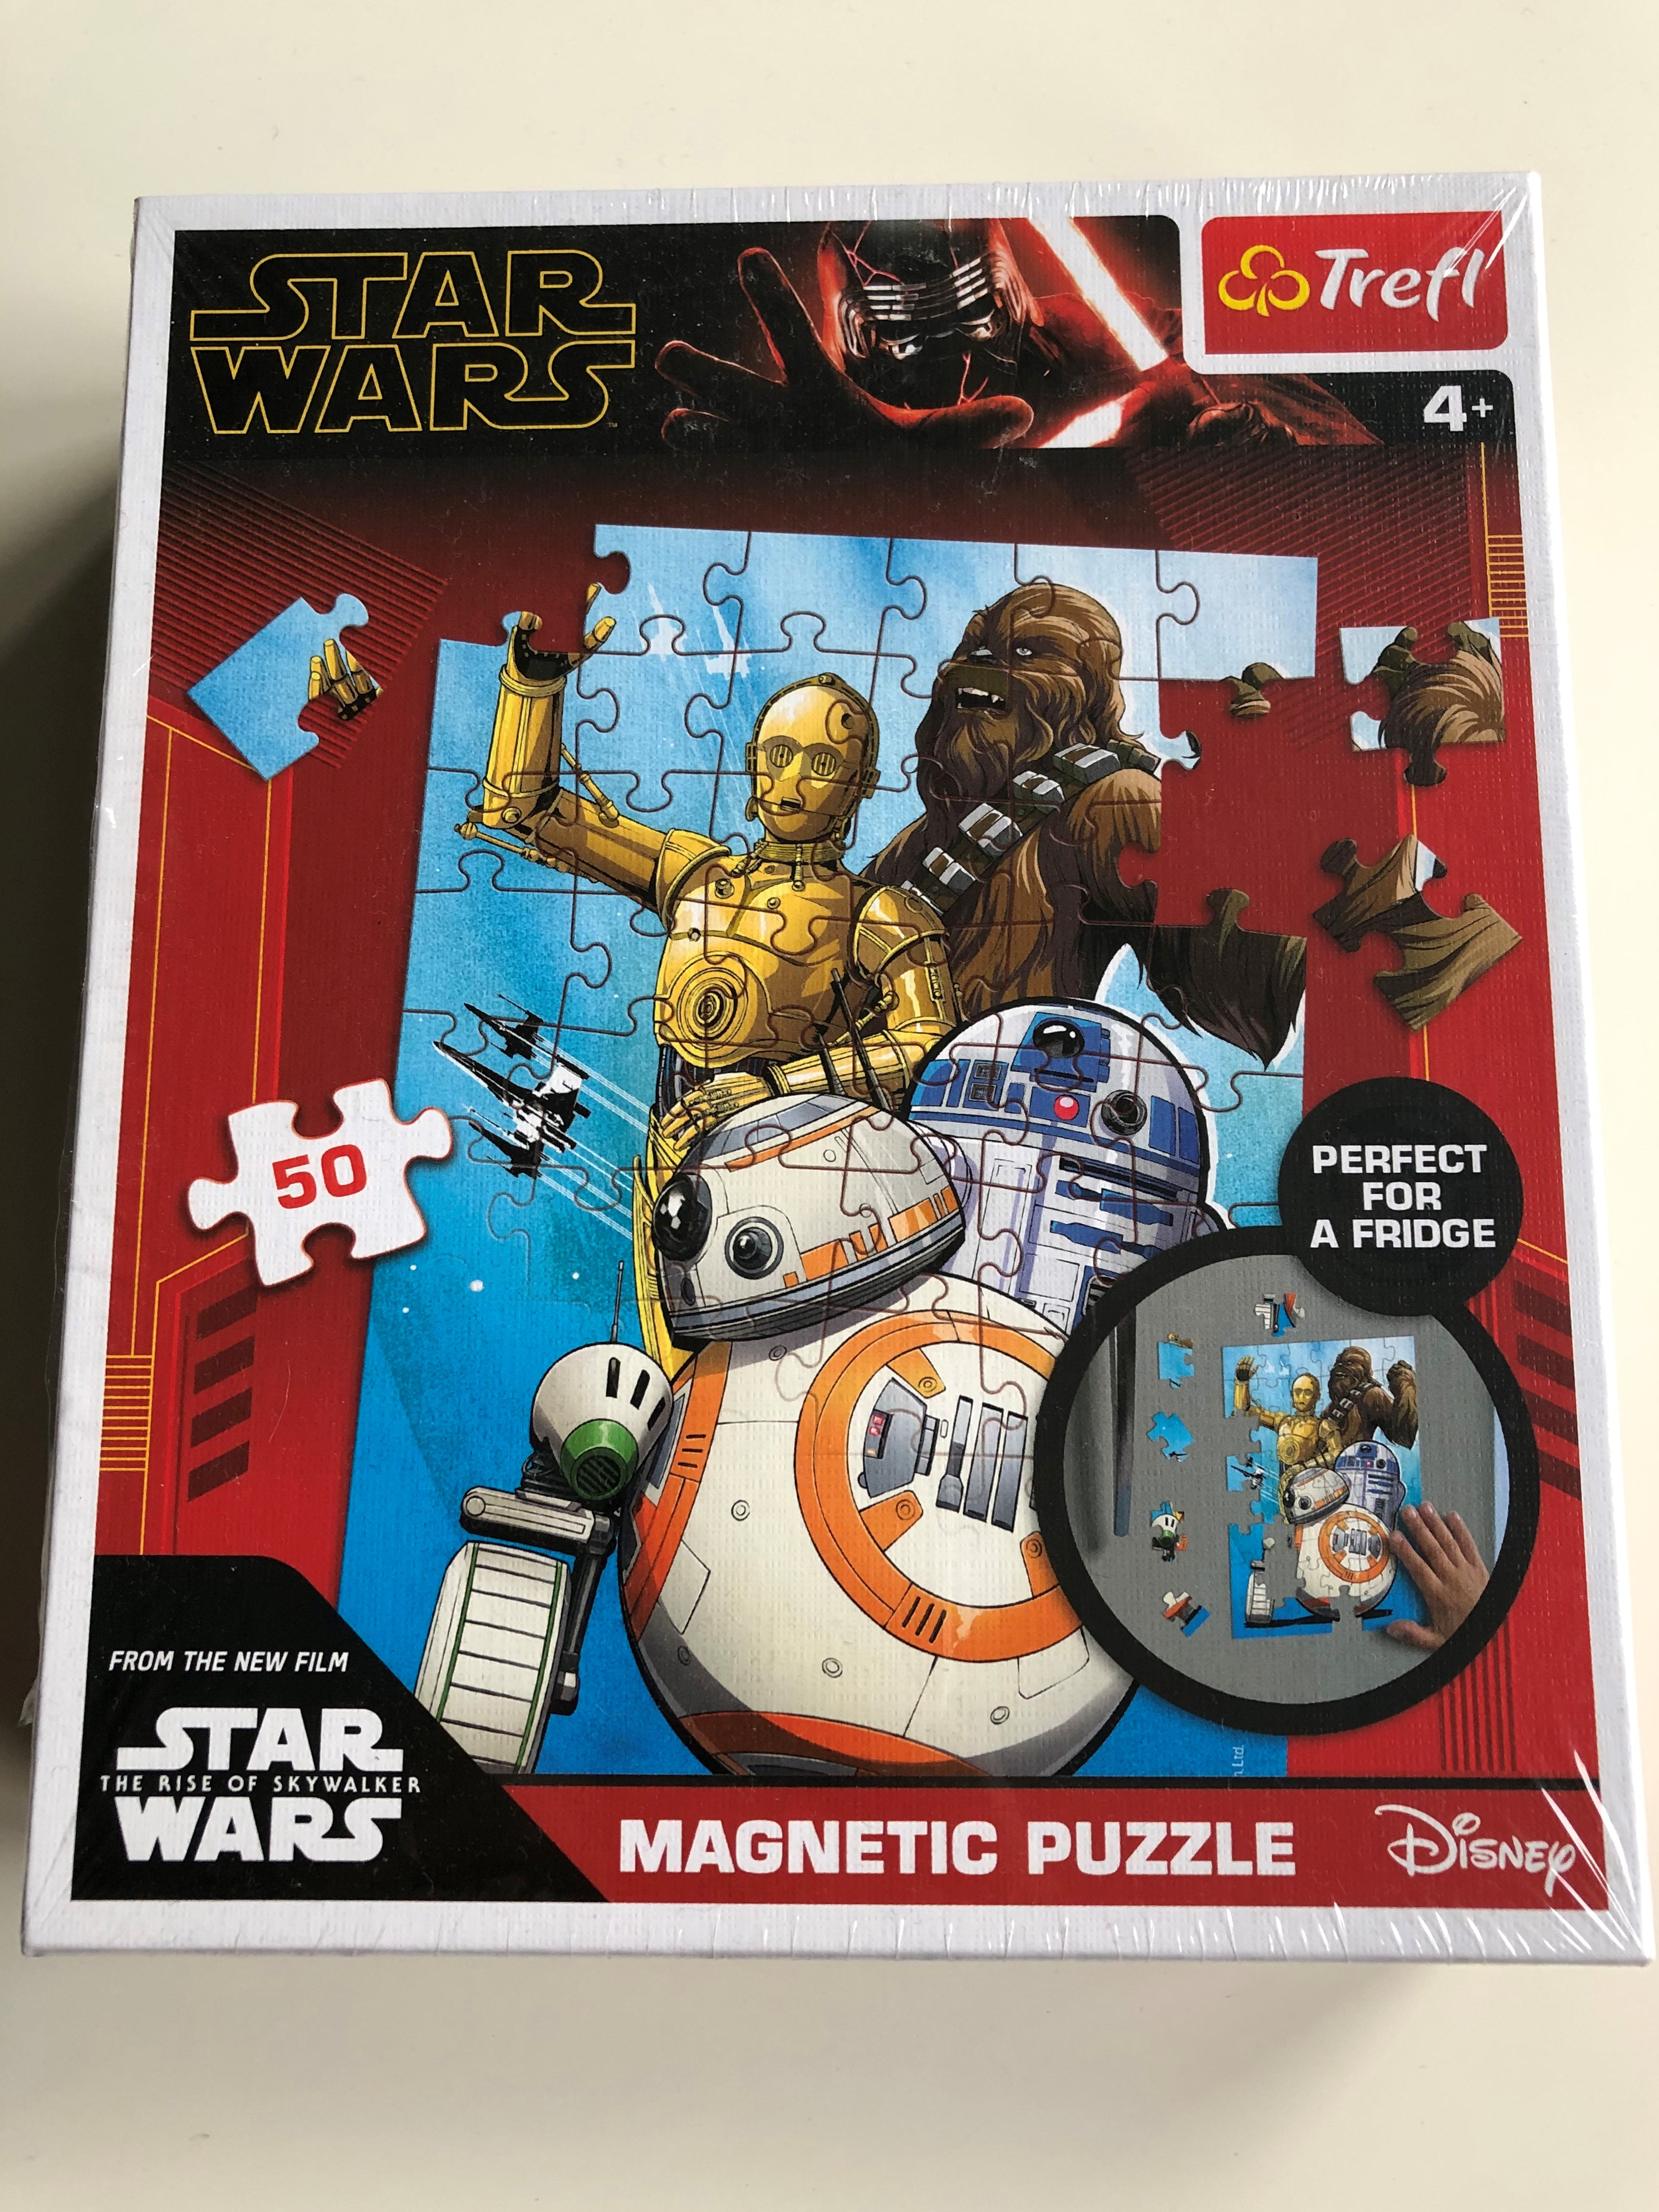 Star Wars Trefl Magnetic Puzzle / Perfect for a fridge / 50 pieces / From  the New Film - The Rise of Skywalker / Trefl Puzzle / Ages 4+ -  bibleinmylanguage